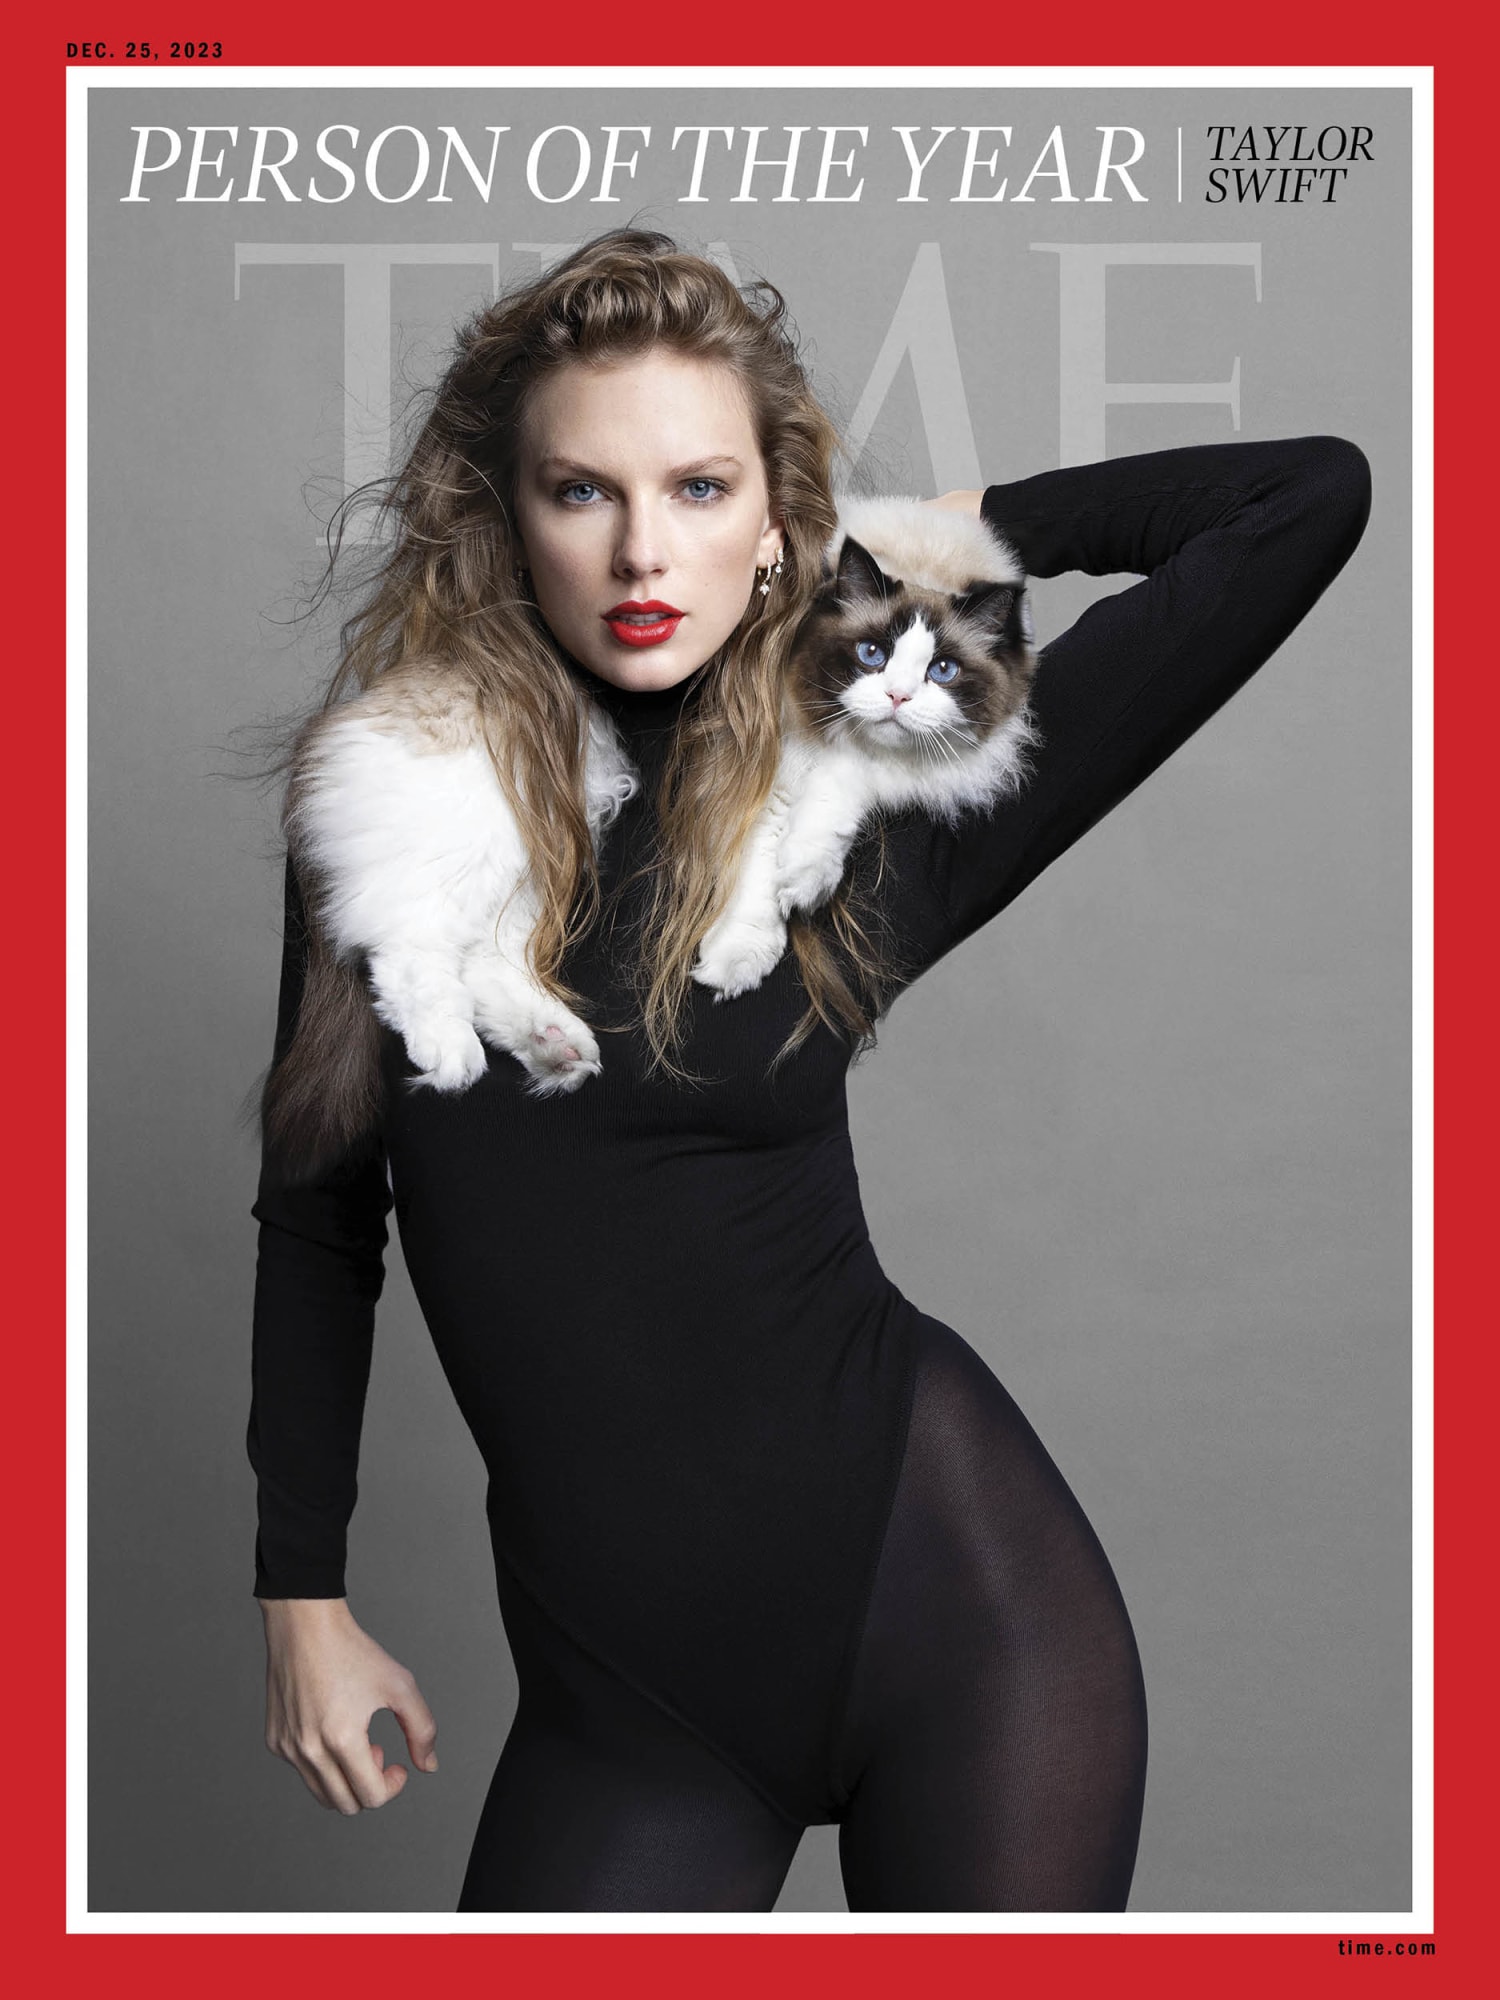 Taylor Swift tops Time's (and seemingly everyone else's) person of the year  list